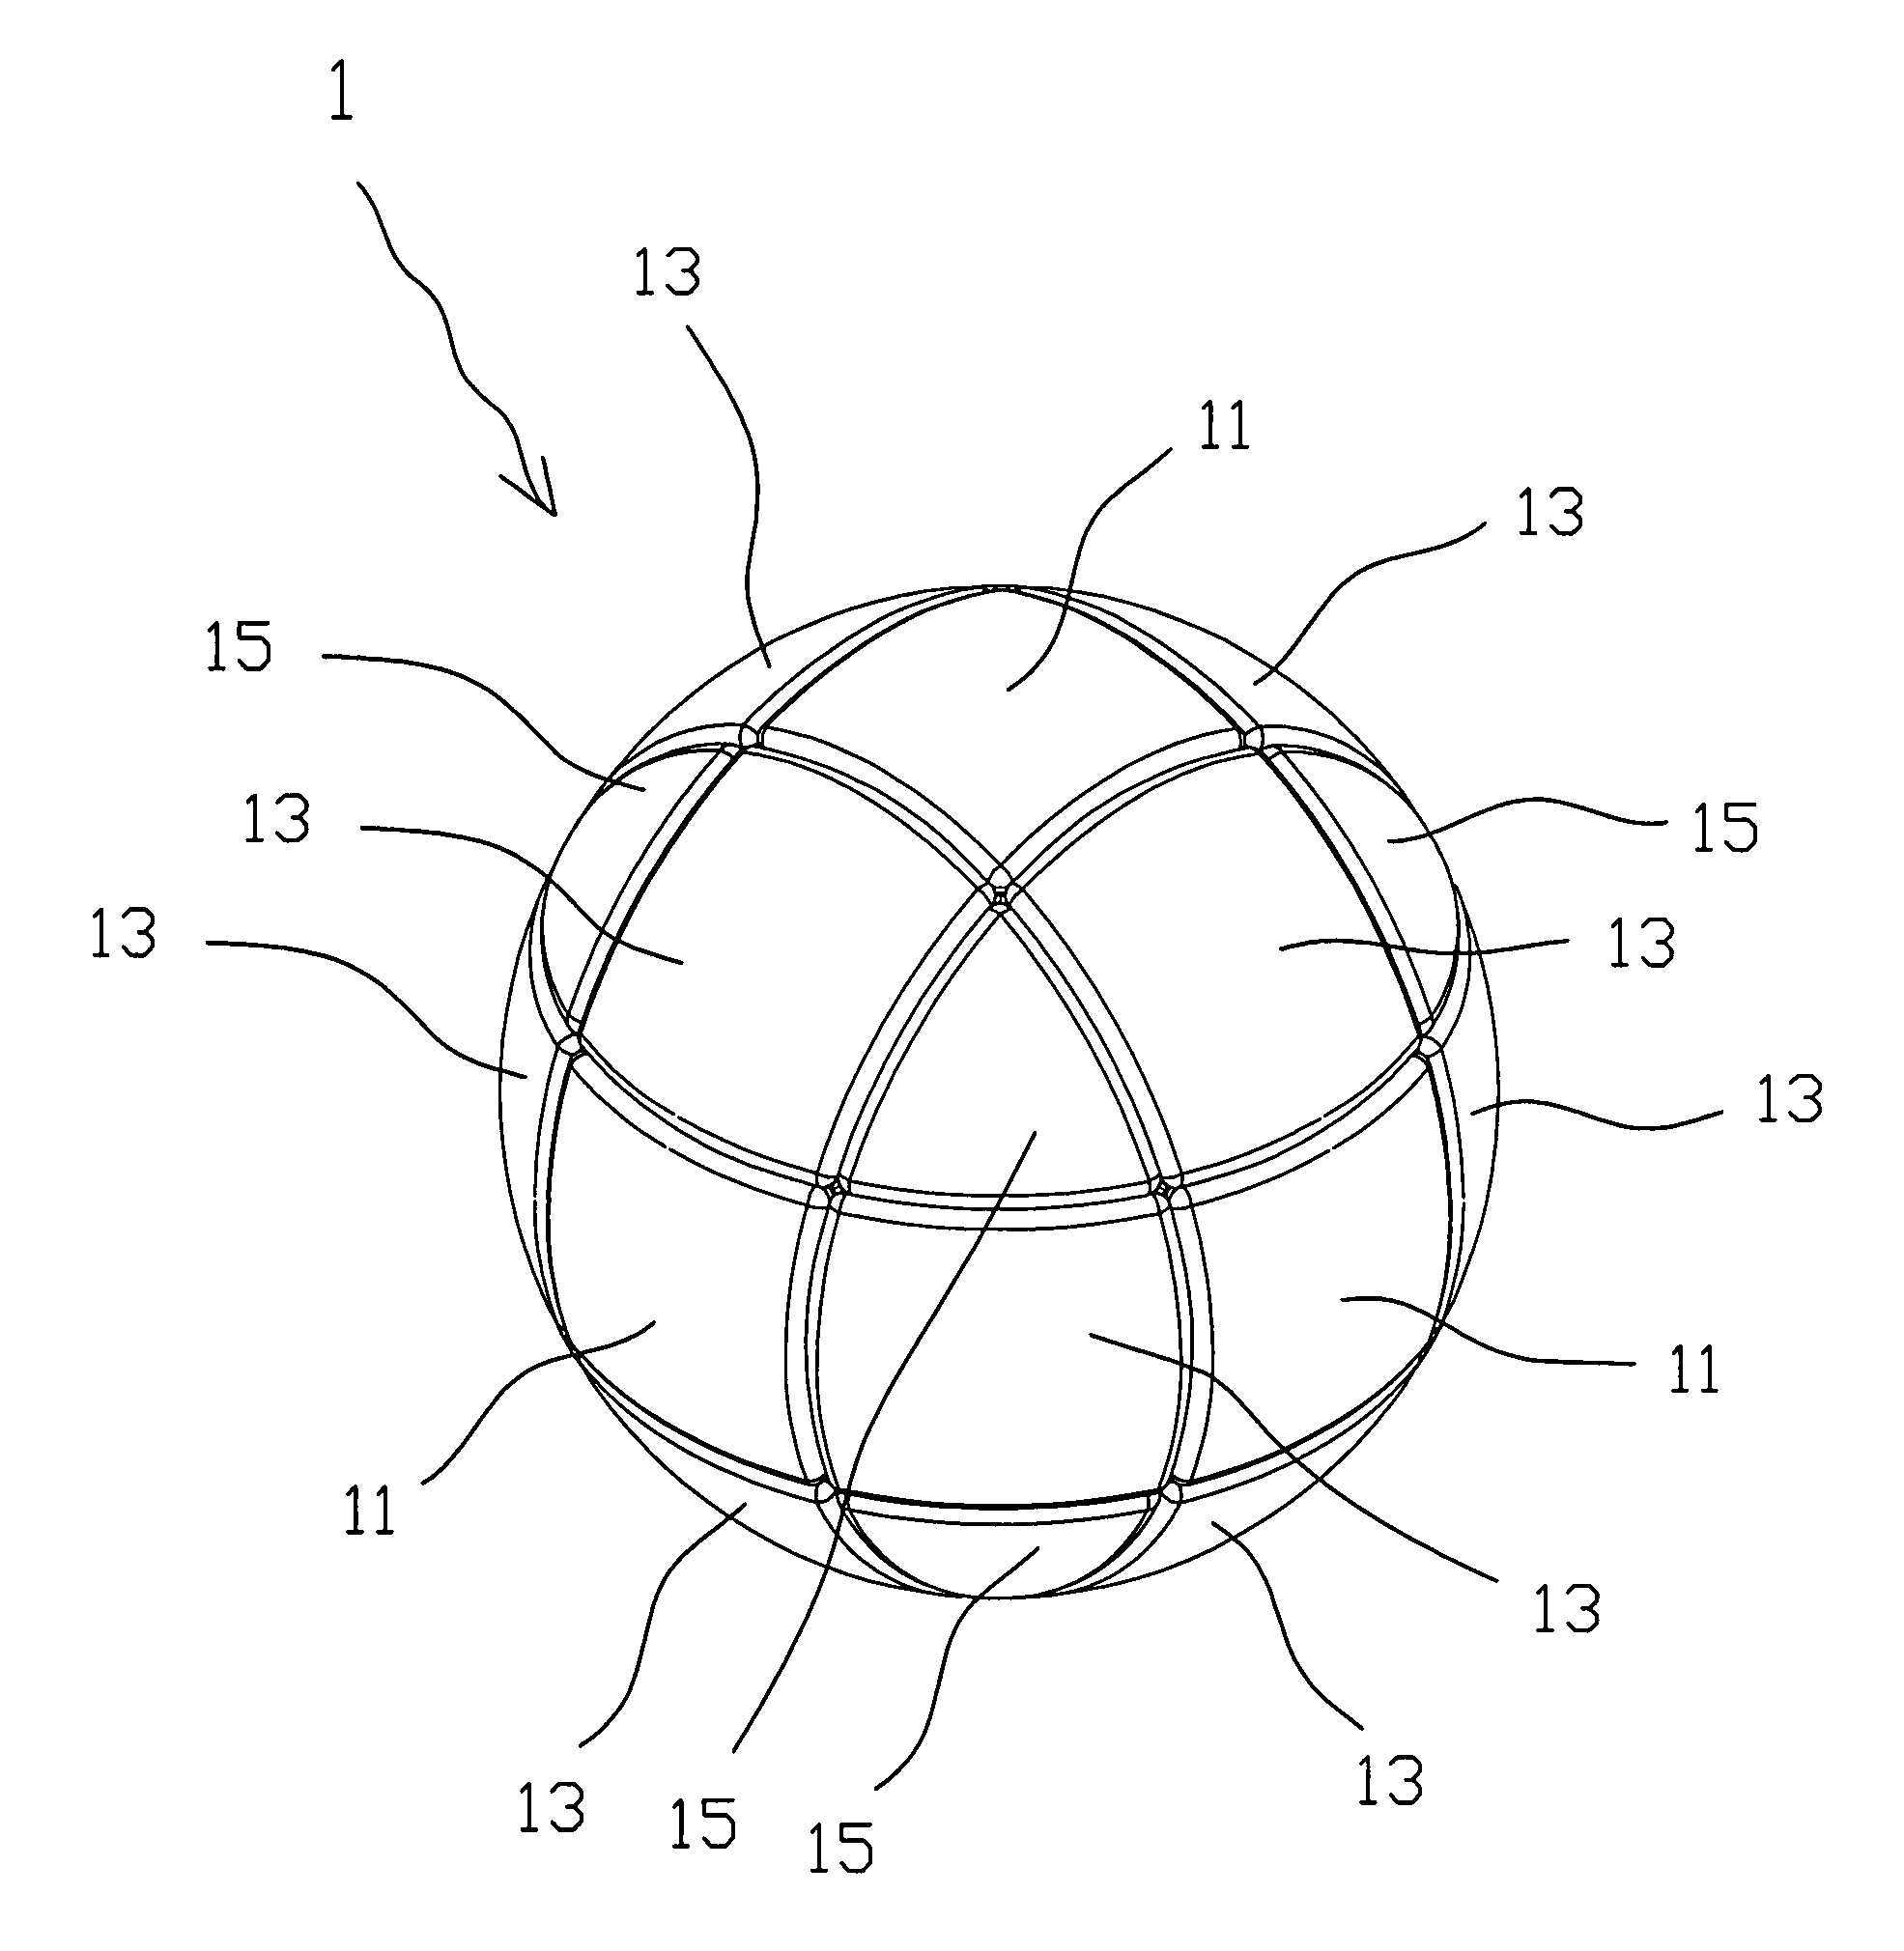 Lionsphere, a three-dimenstional puzzle